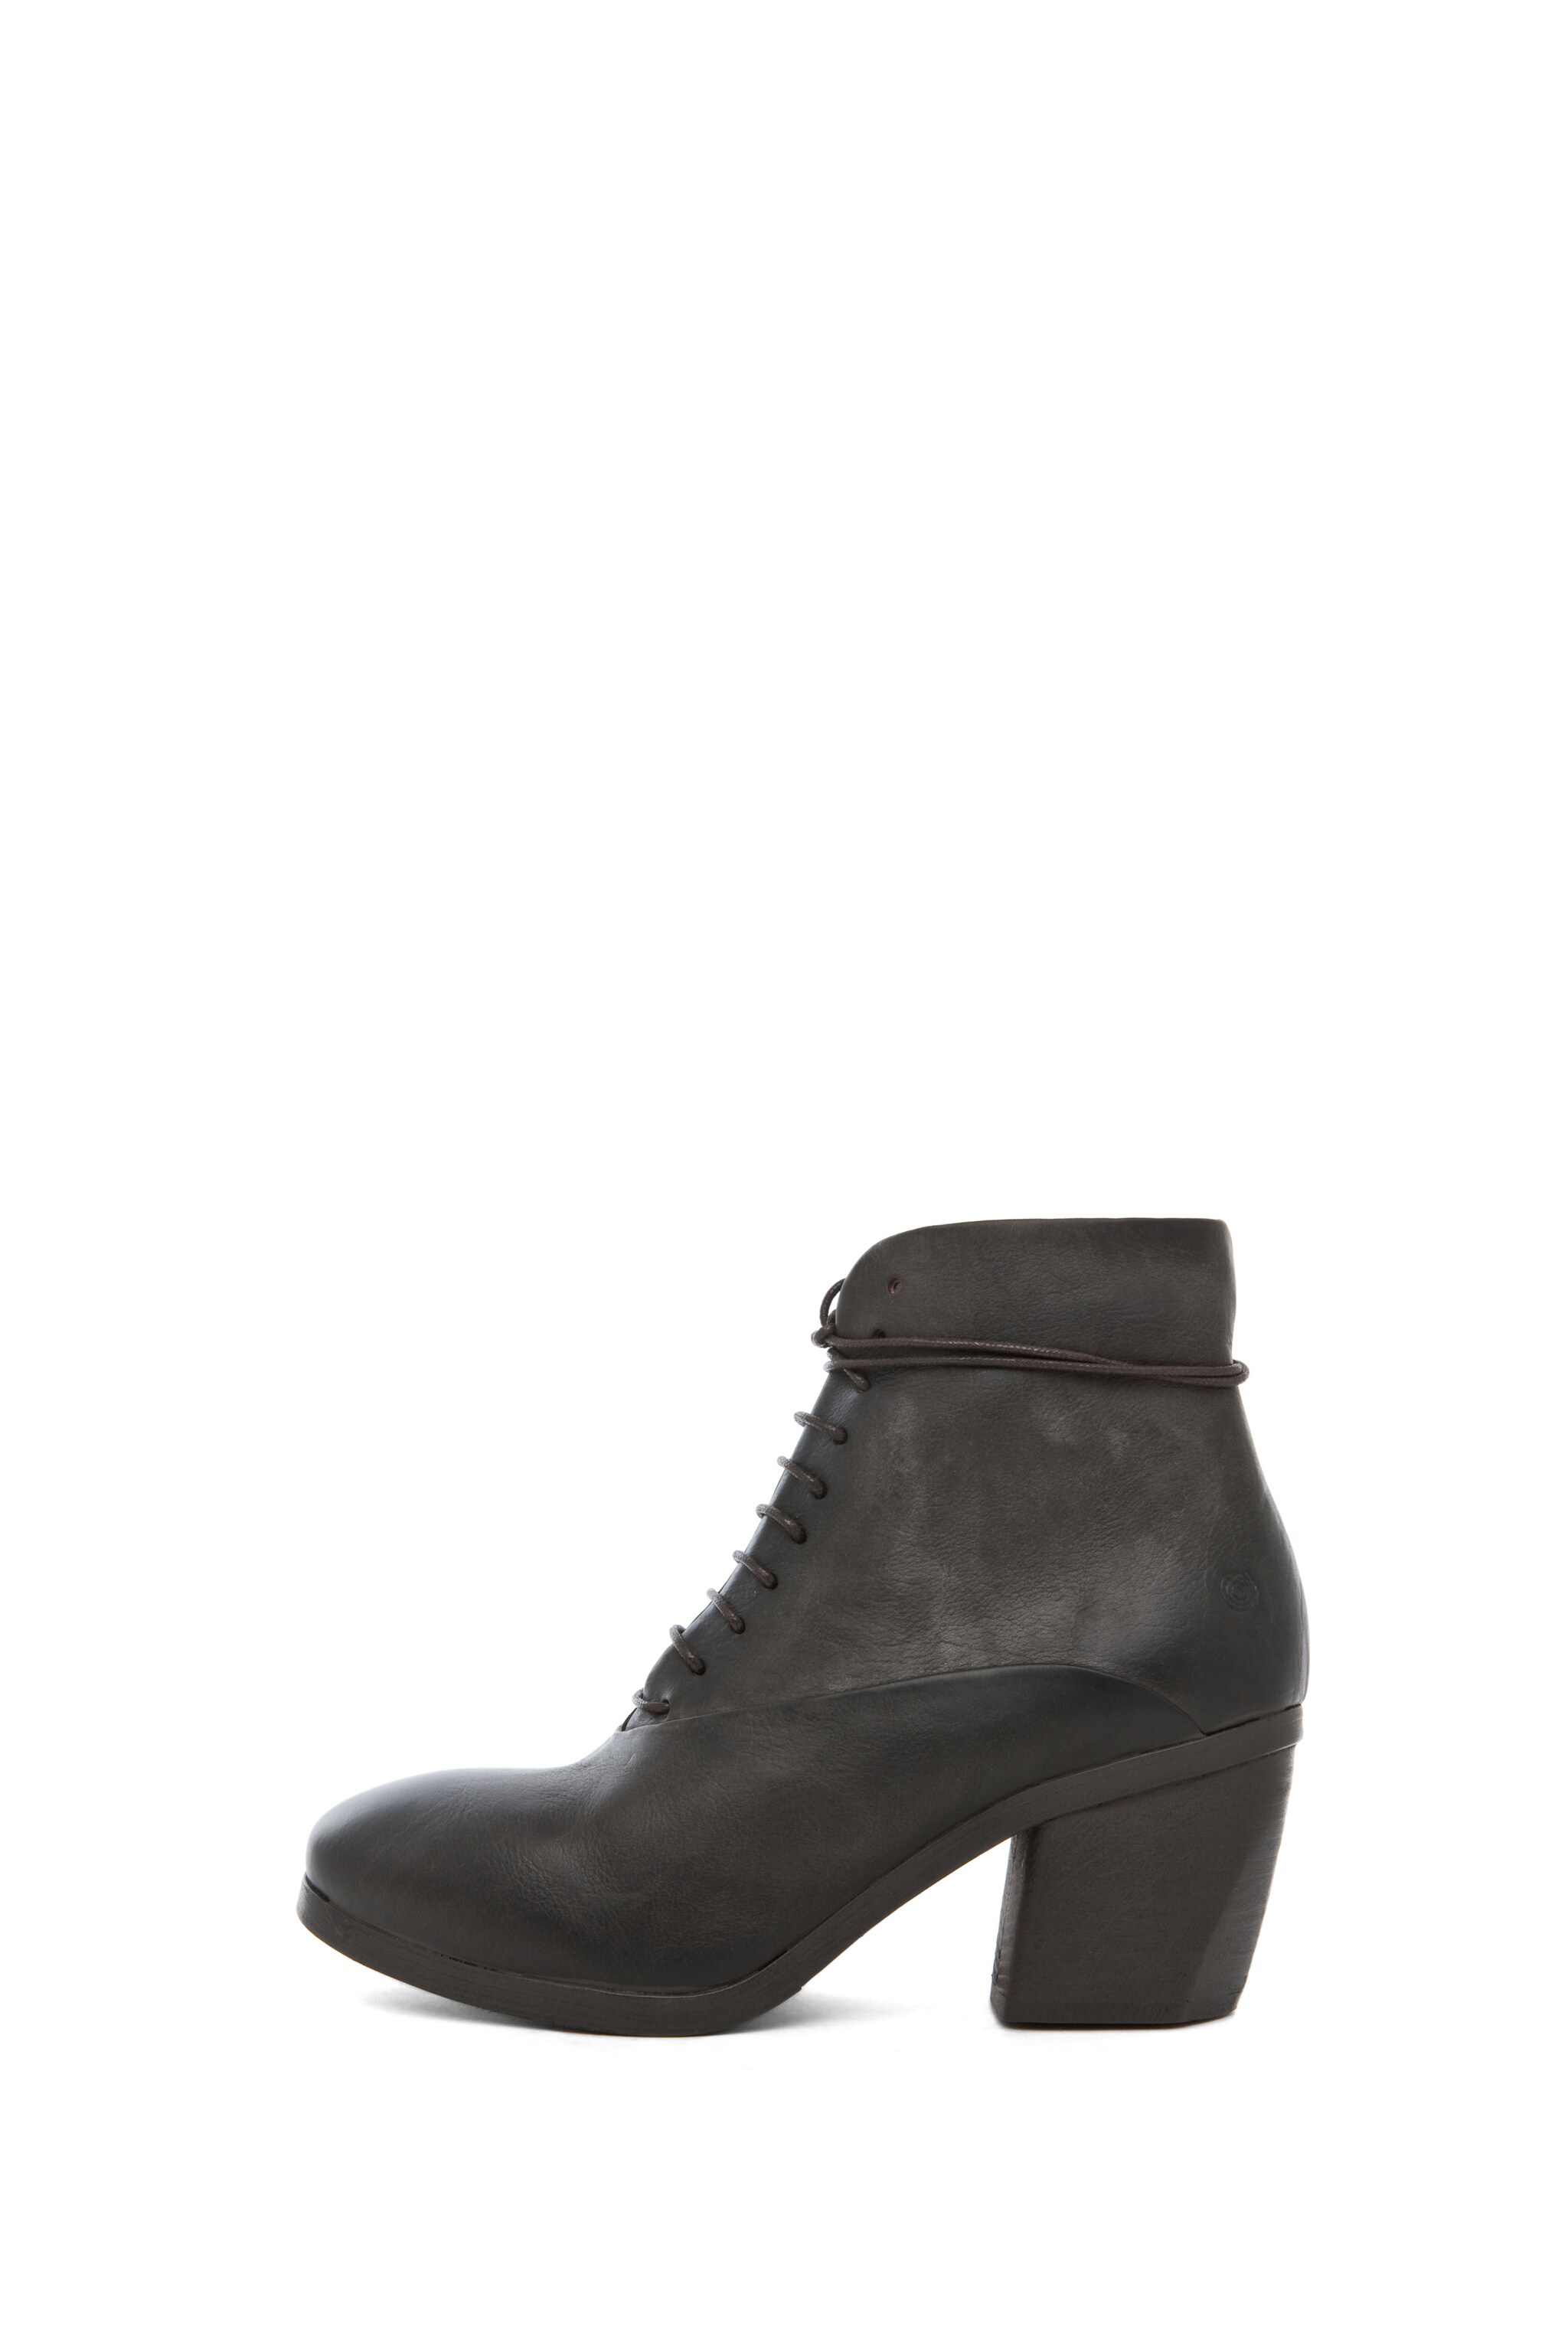 Image 1 of Marsell Leather Lace Up Booties in Marcio